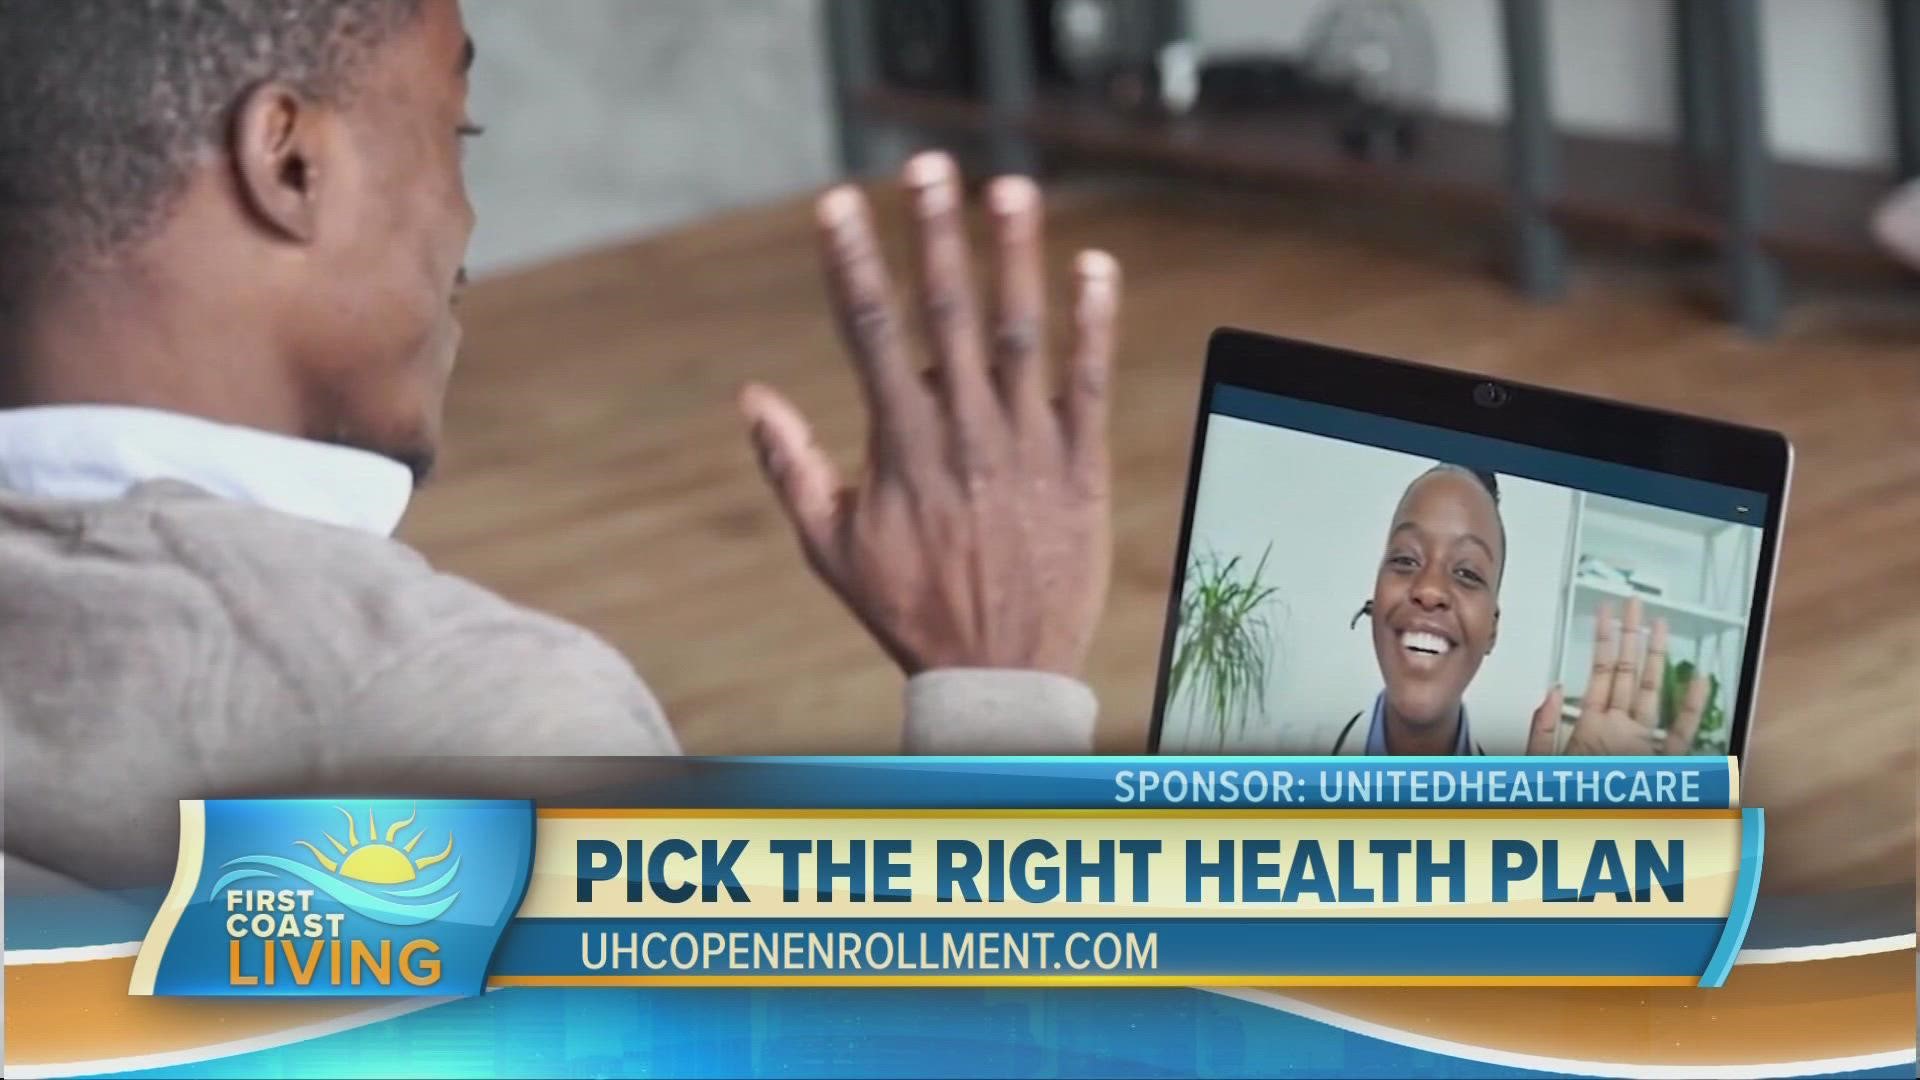 Dr. Rhonda Randall, Chief Medical Officer at UnitedHealthCare shares tips that can help you pick the right plan and potentially save money.